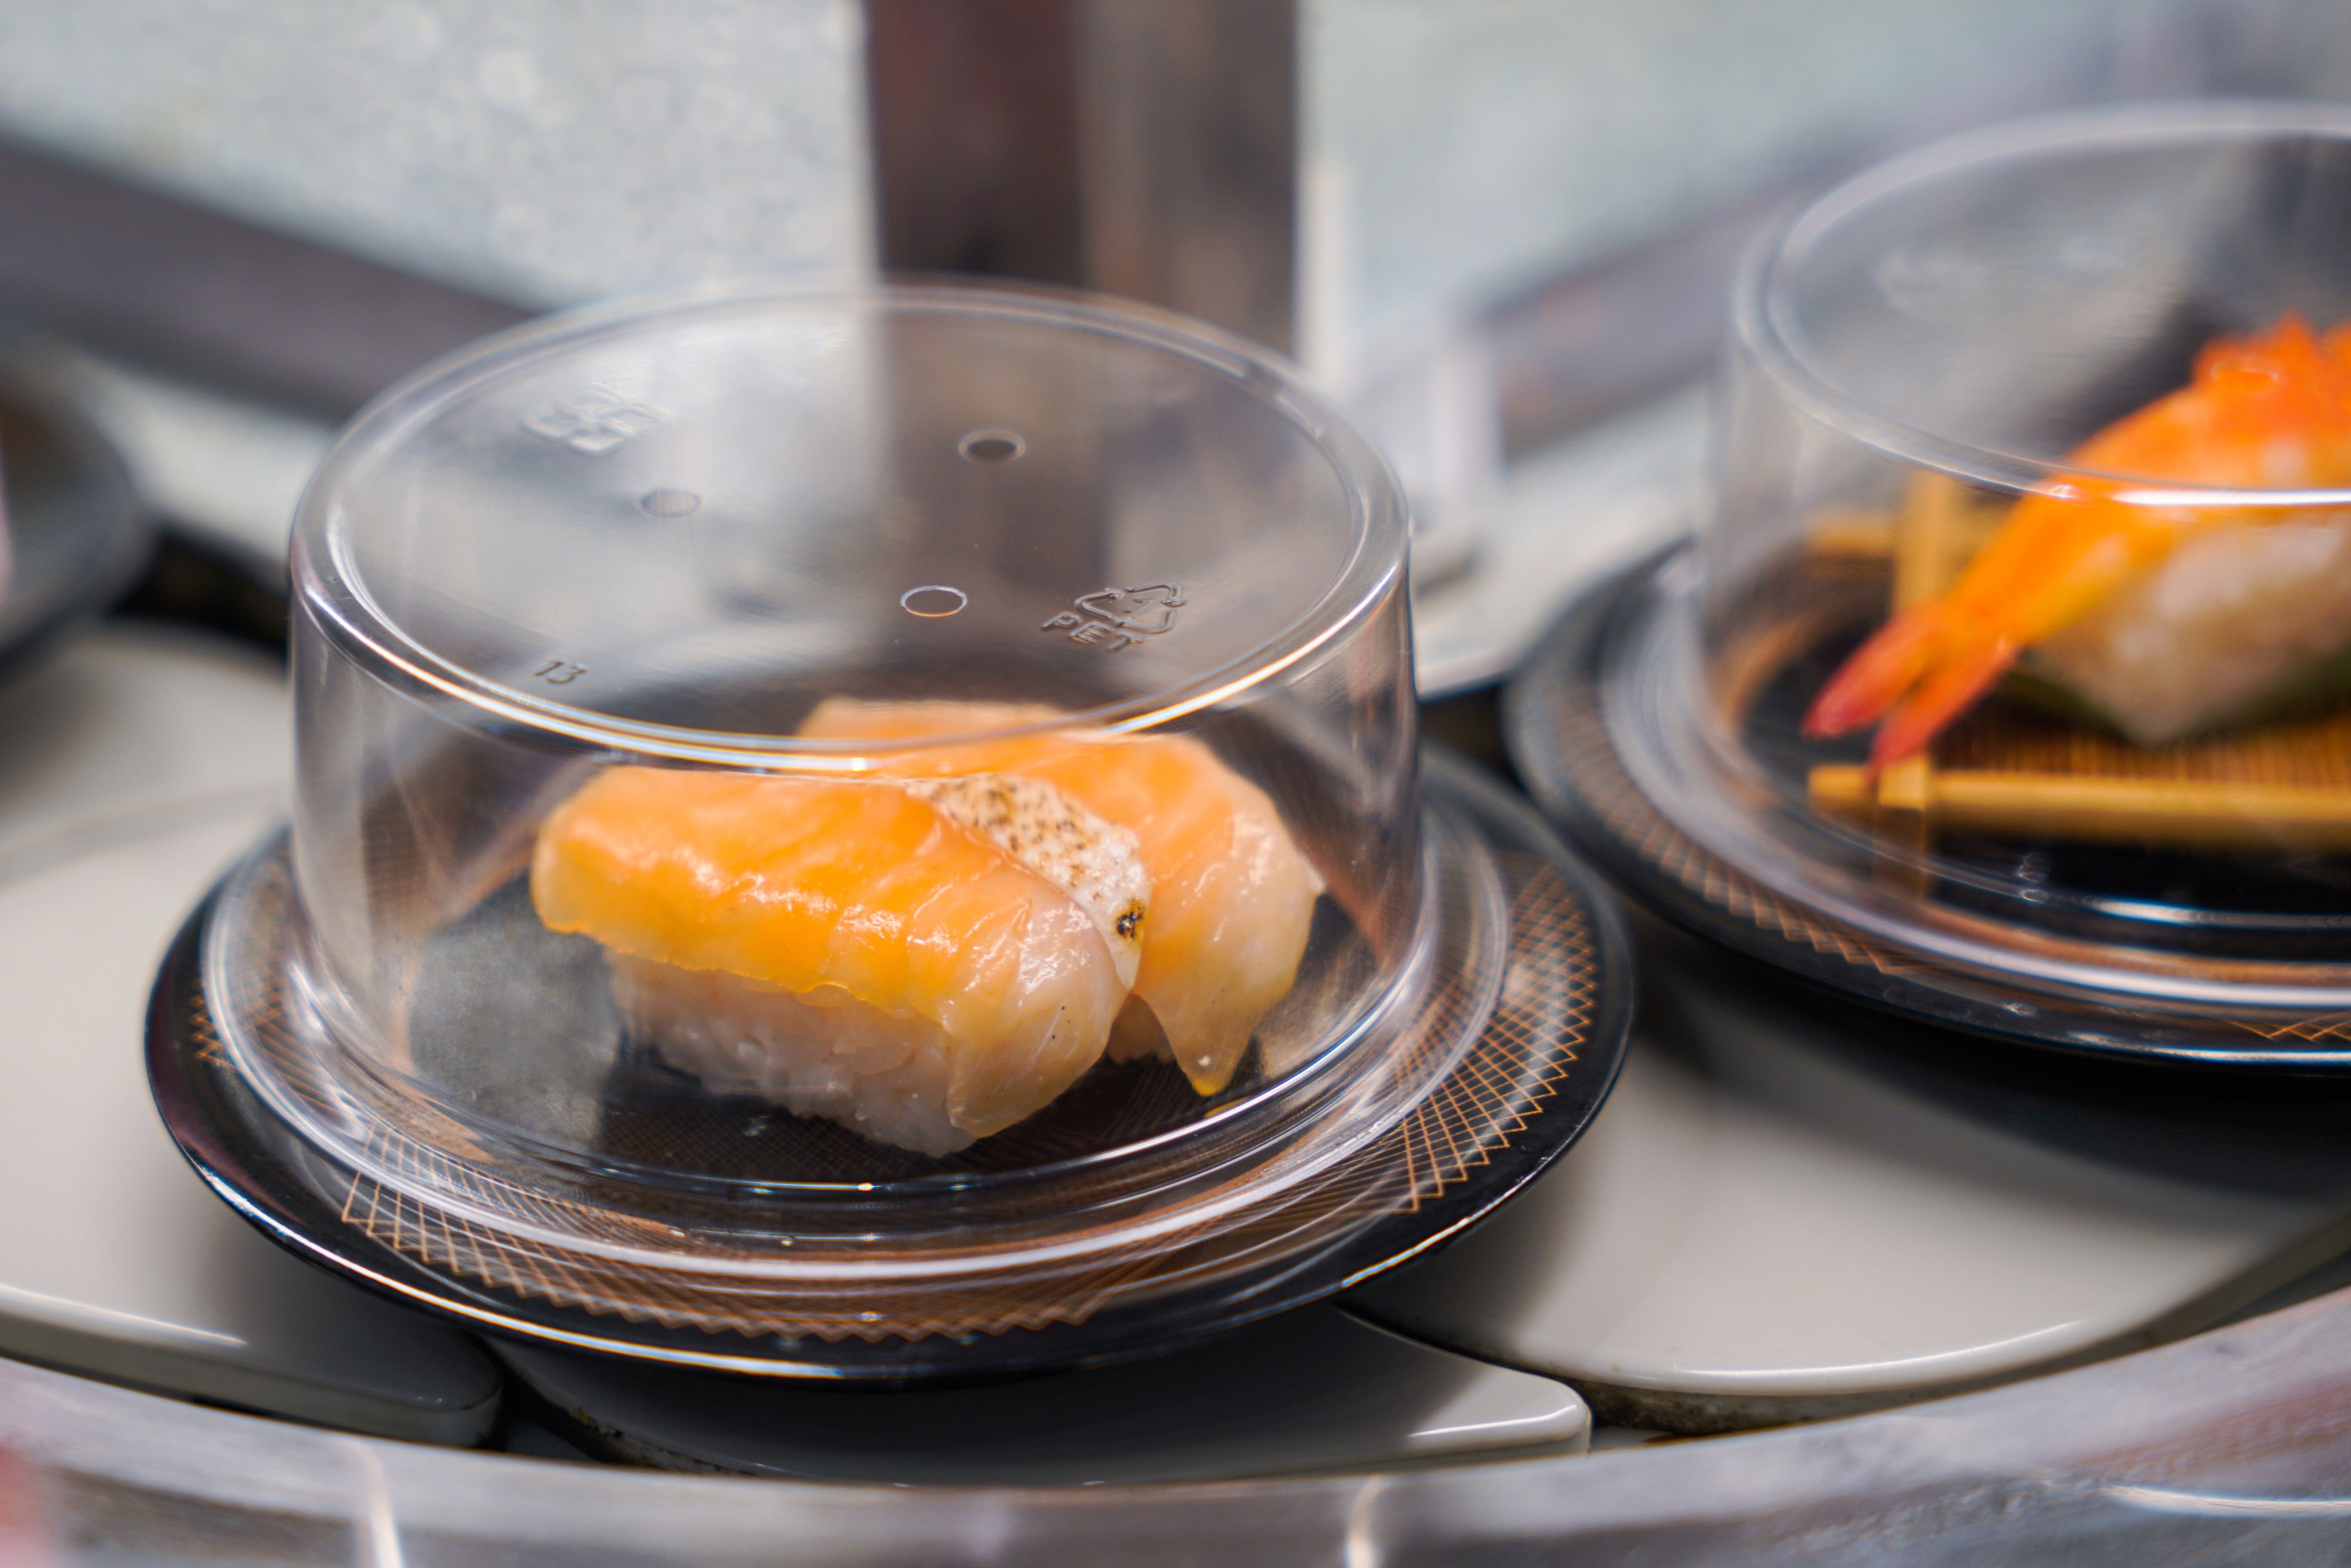 Sushi in a Japanese restaurant, in Beijing before a ban on importing seafood from Japan over its release of contaminated water from the Fukushima nuclear power plant came into force. There are other contamination worries for seafood lovers. Photo: EPA-EFE